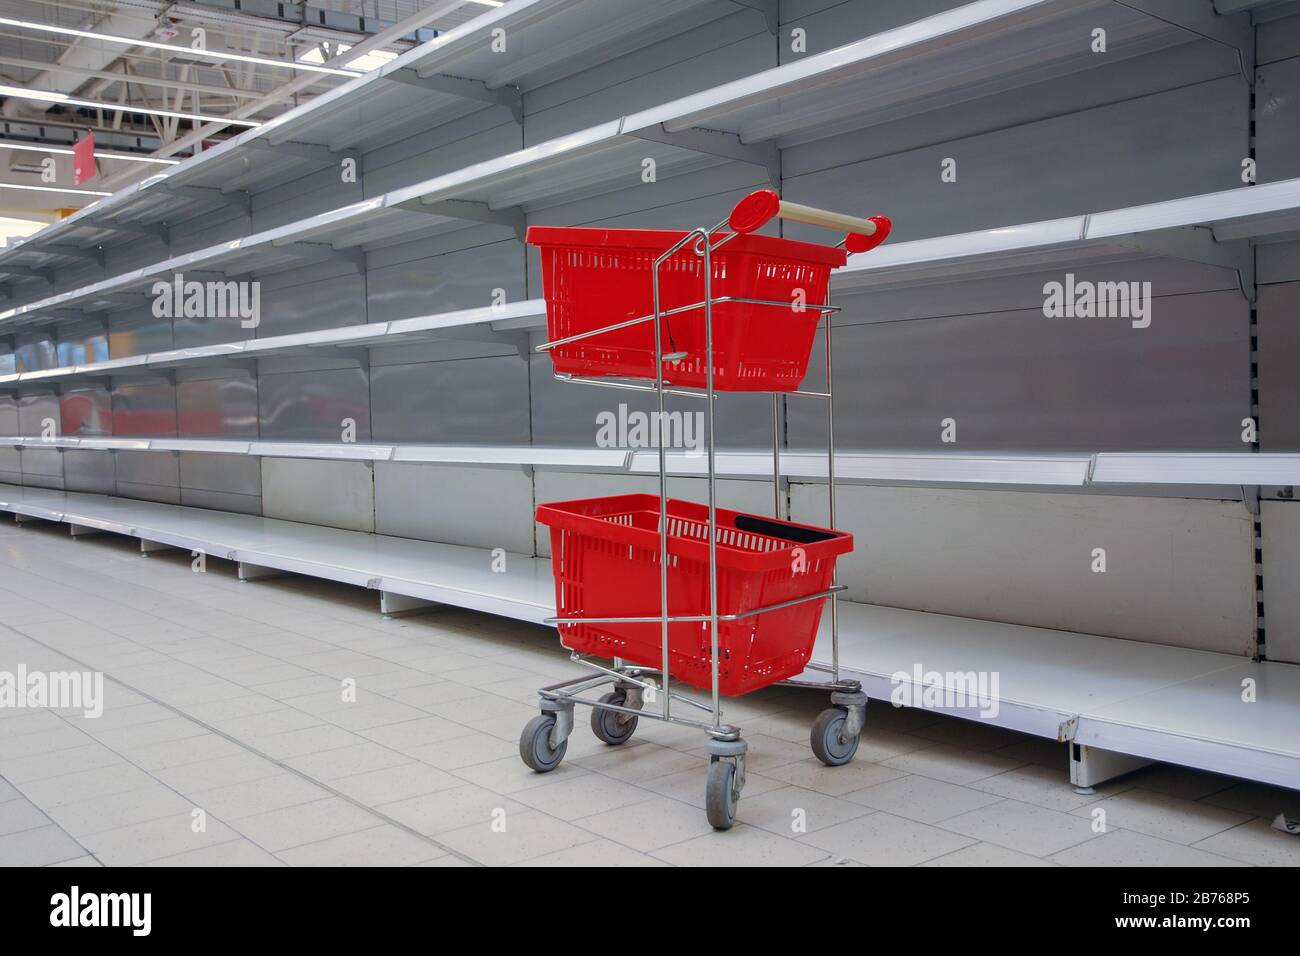 shopping trolley with empty baskets against empty shelves in grocery store Stock Photo